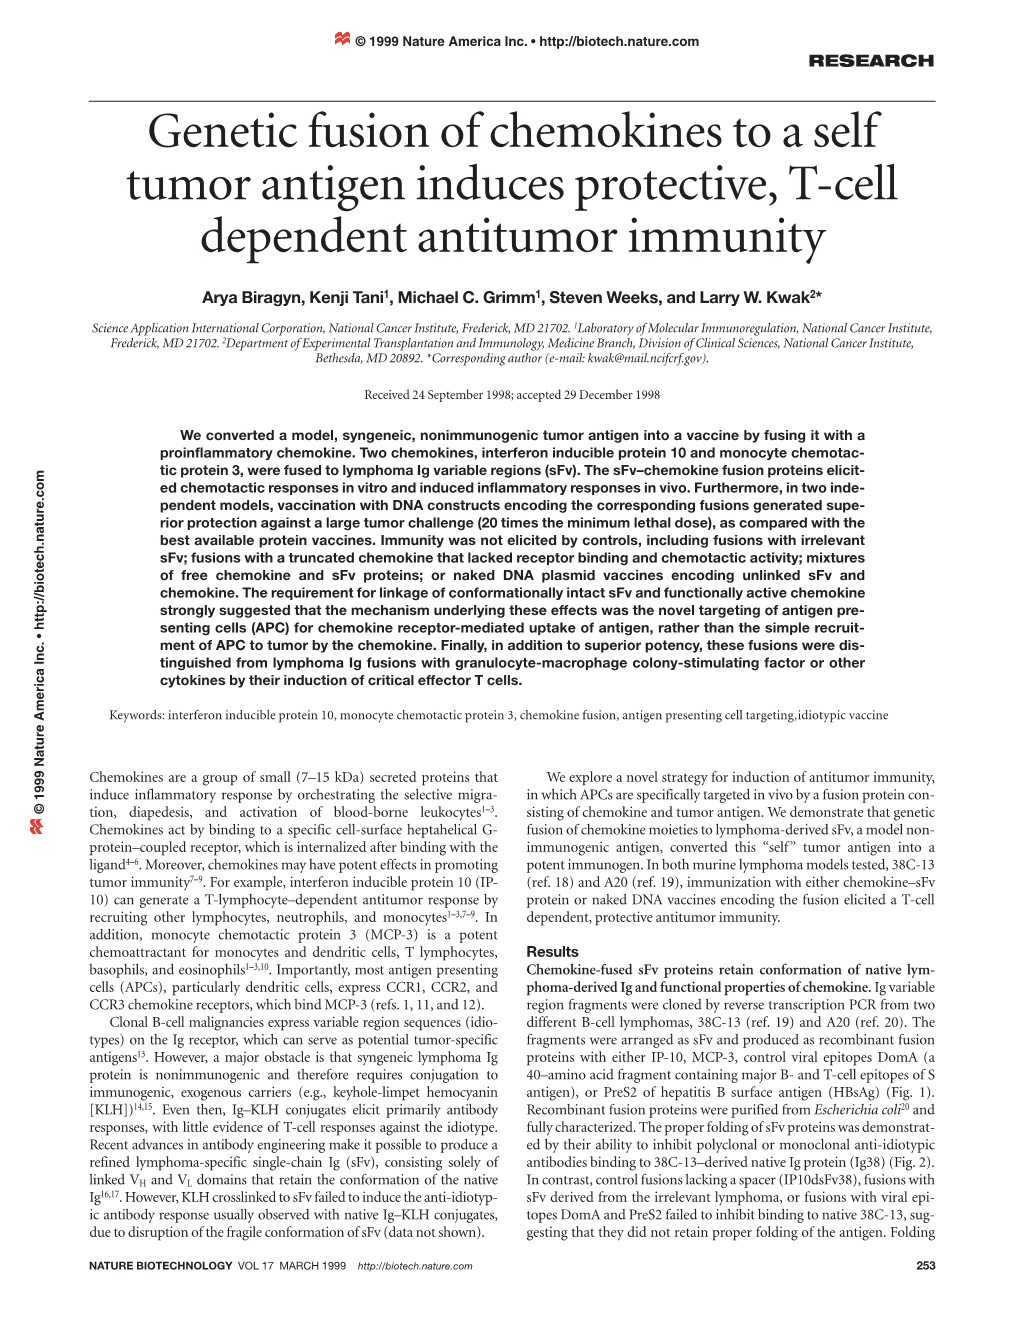 Genetic Fusion of Chemokines to a Self Tumor Antigen Induces Protective, T-Cell Dependent Antitumor Immunity